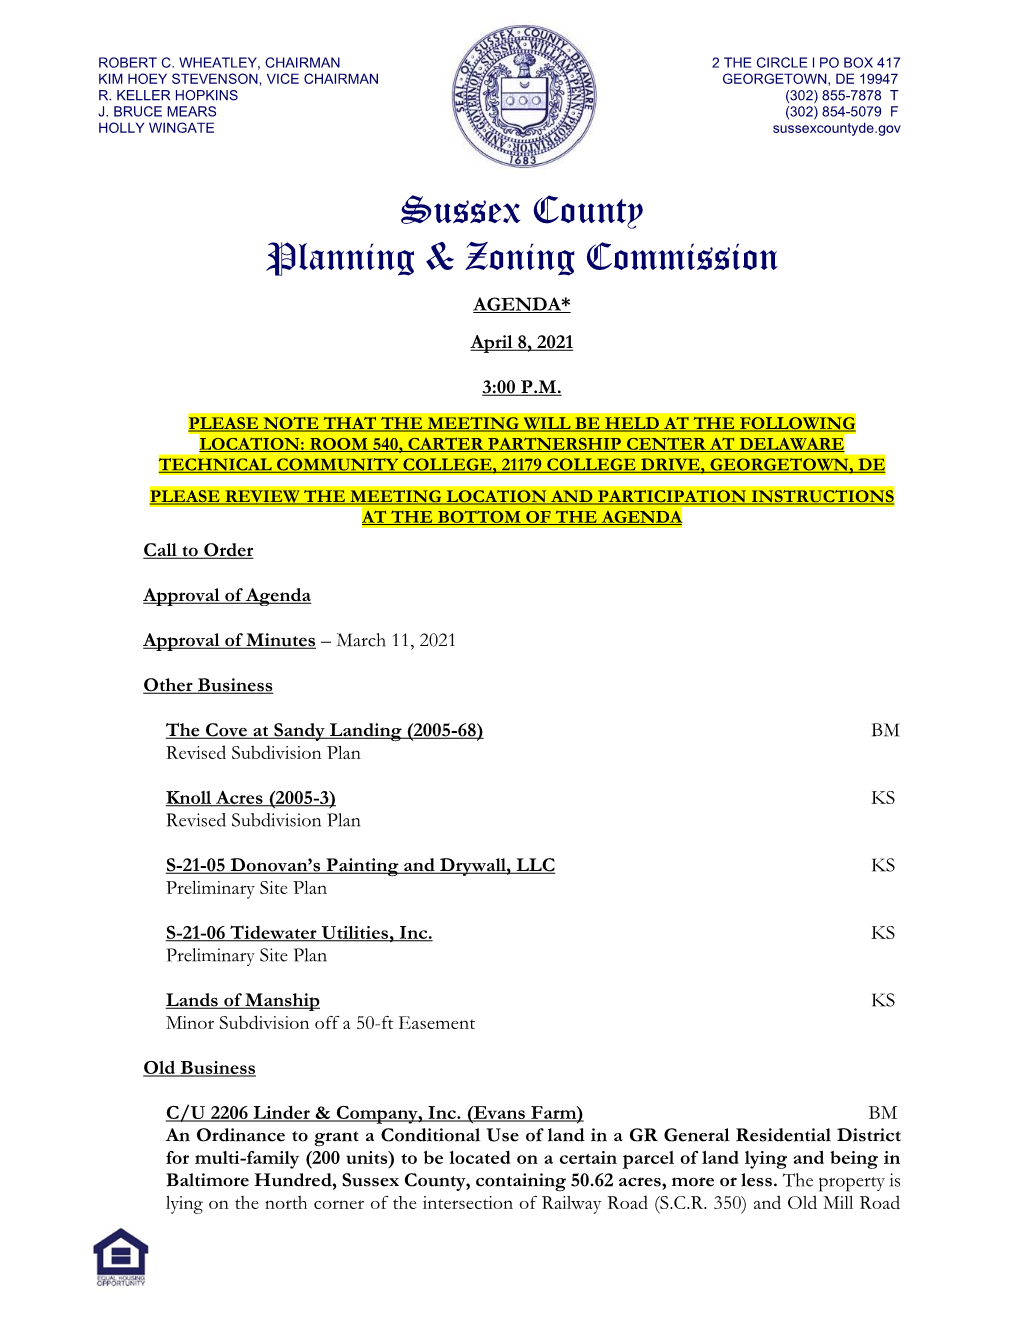 Sussex County Planning & Zoning Commission